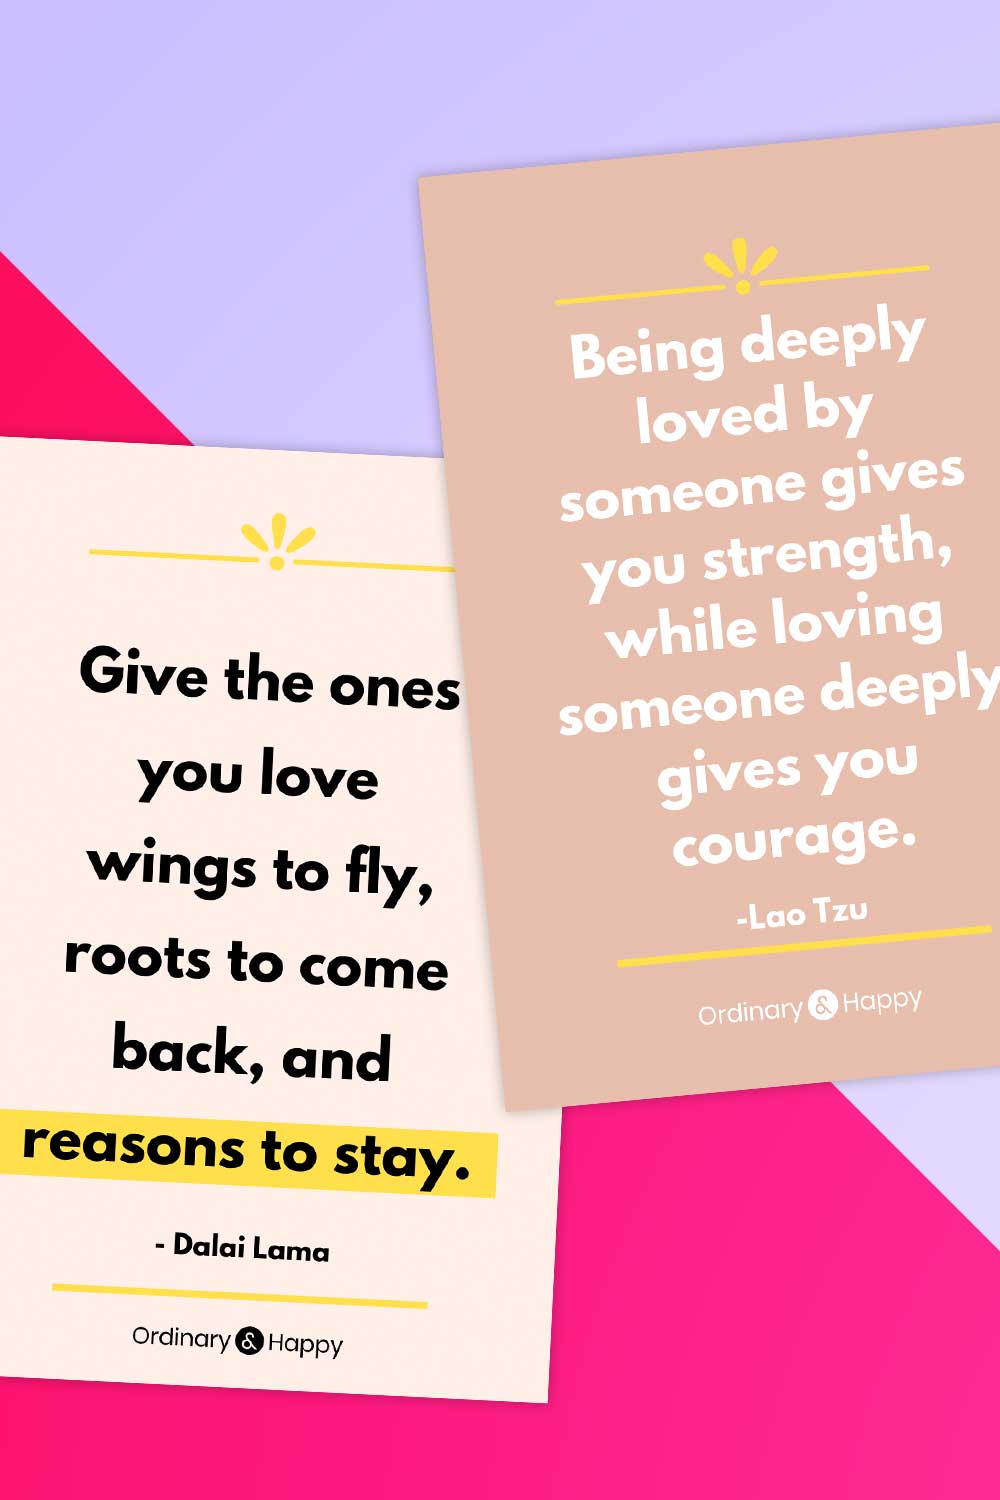 10 Relationship Quotes To Inspire You (image pin)